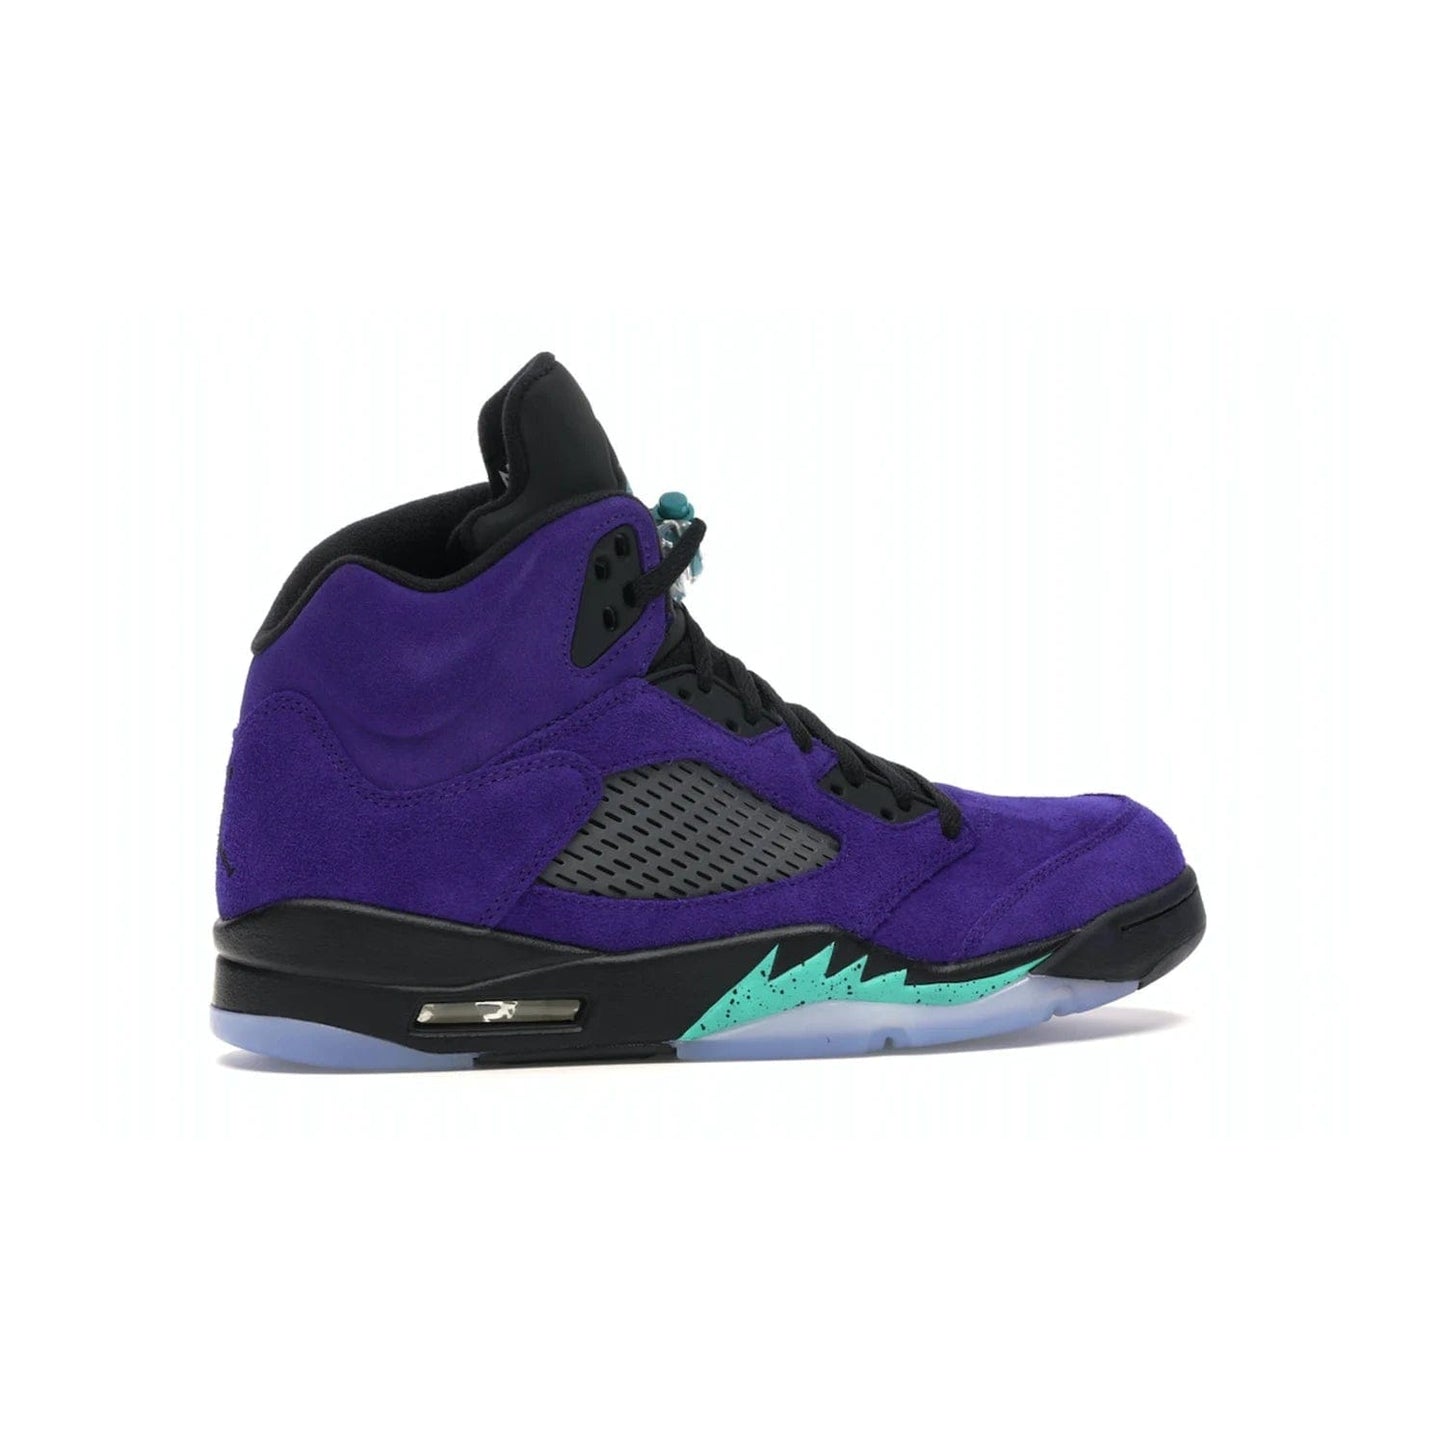 Jordan 5 Retro Alternate Grape - Image 35 - Only at www.BallersClubKickz.com - Bring the classic Jordan 5 Retro Alternate Grape to your sneaker collection! Featuring a purple suede upper, charcoal underlays, green detailing, and an icy and green outsole. Releasing for the first time since 1990, don't miss this chance to add a piece of sneaker history to your collection.